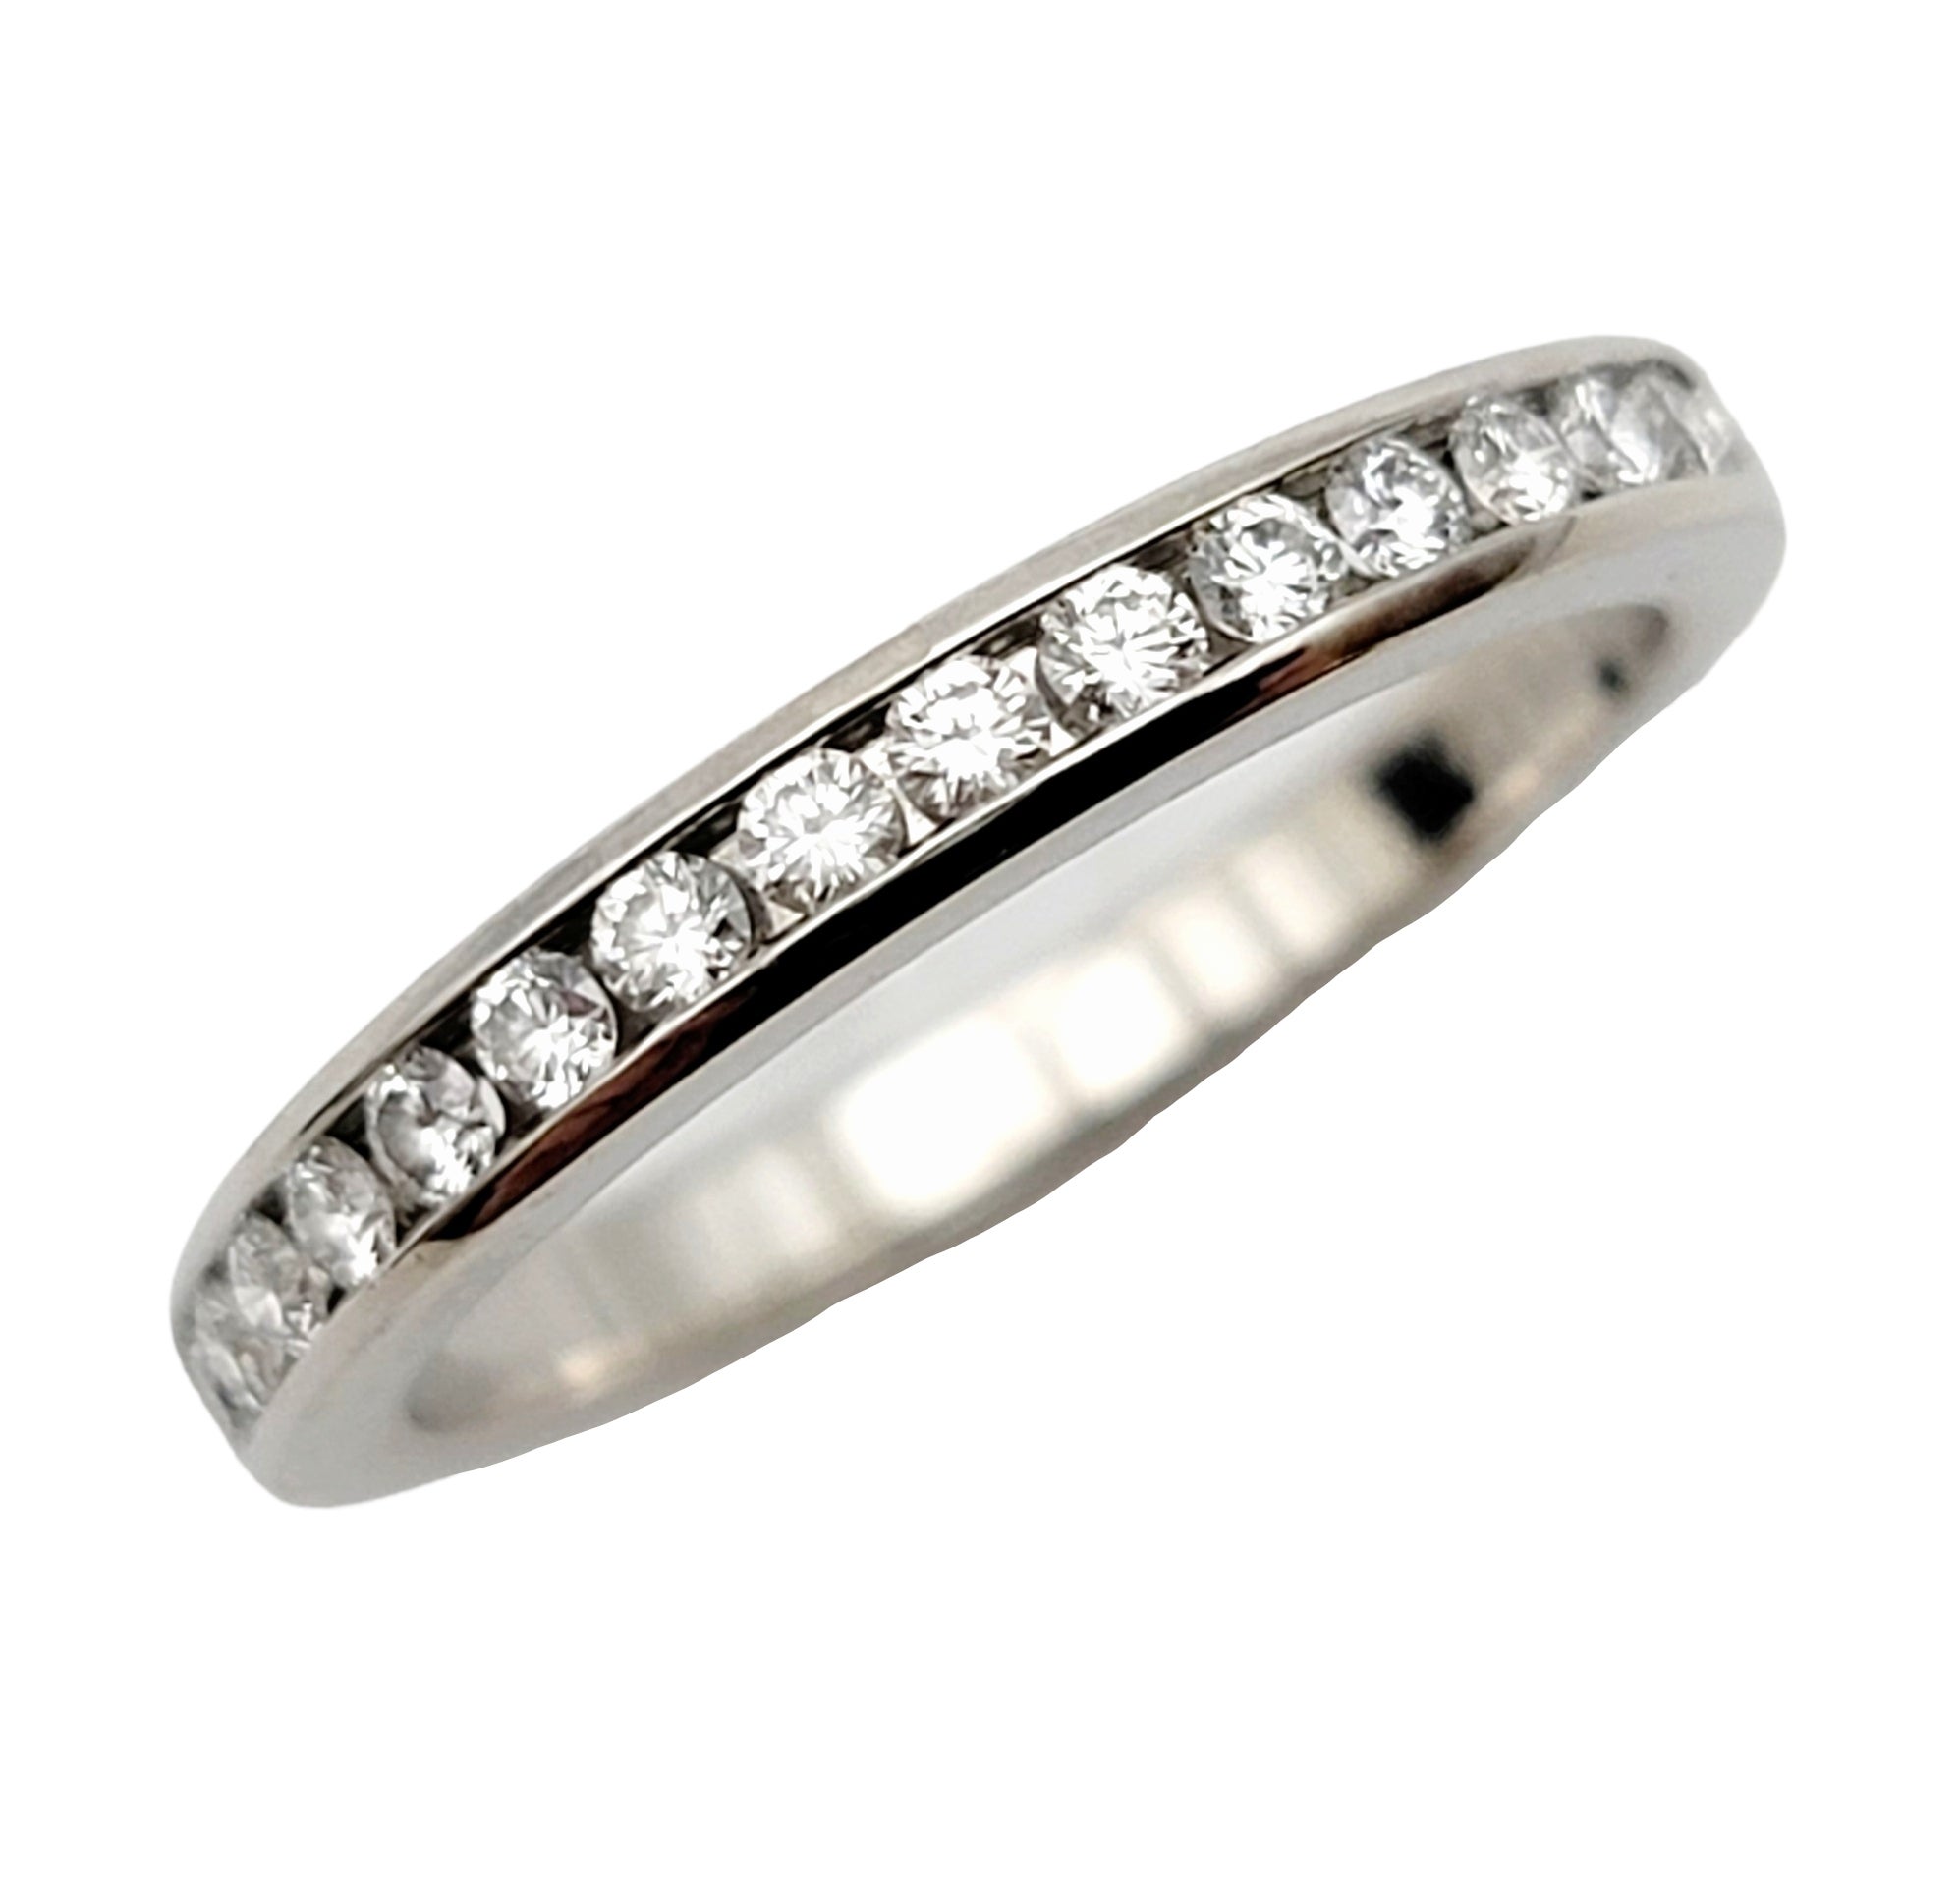 Ring size: 5.25

Stunning Tiffany & Co. diamond semi eternity band ring. Founded in 1837 in New York City, Tiffany & Co. is one of the world's most storied luxury design houses recognized globally for its innovative jewelry design, extraordinary